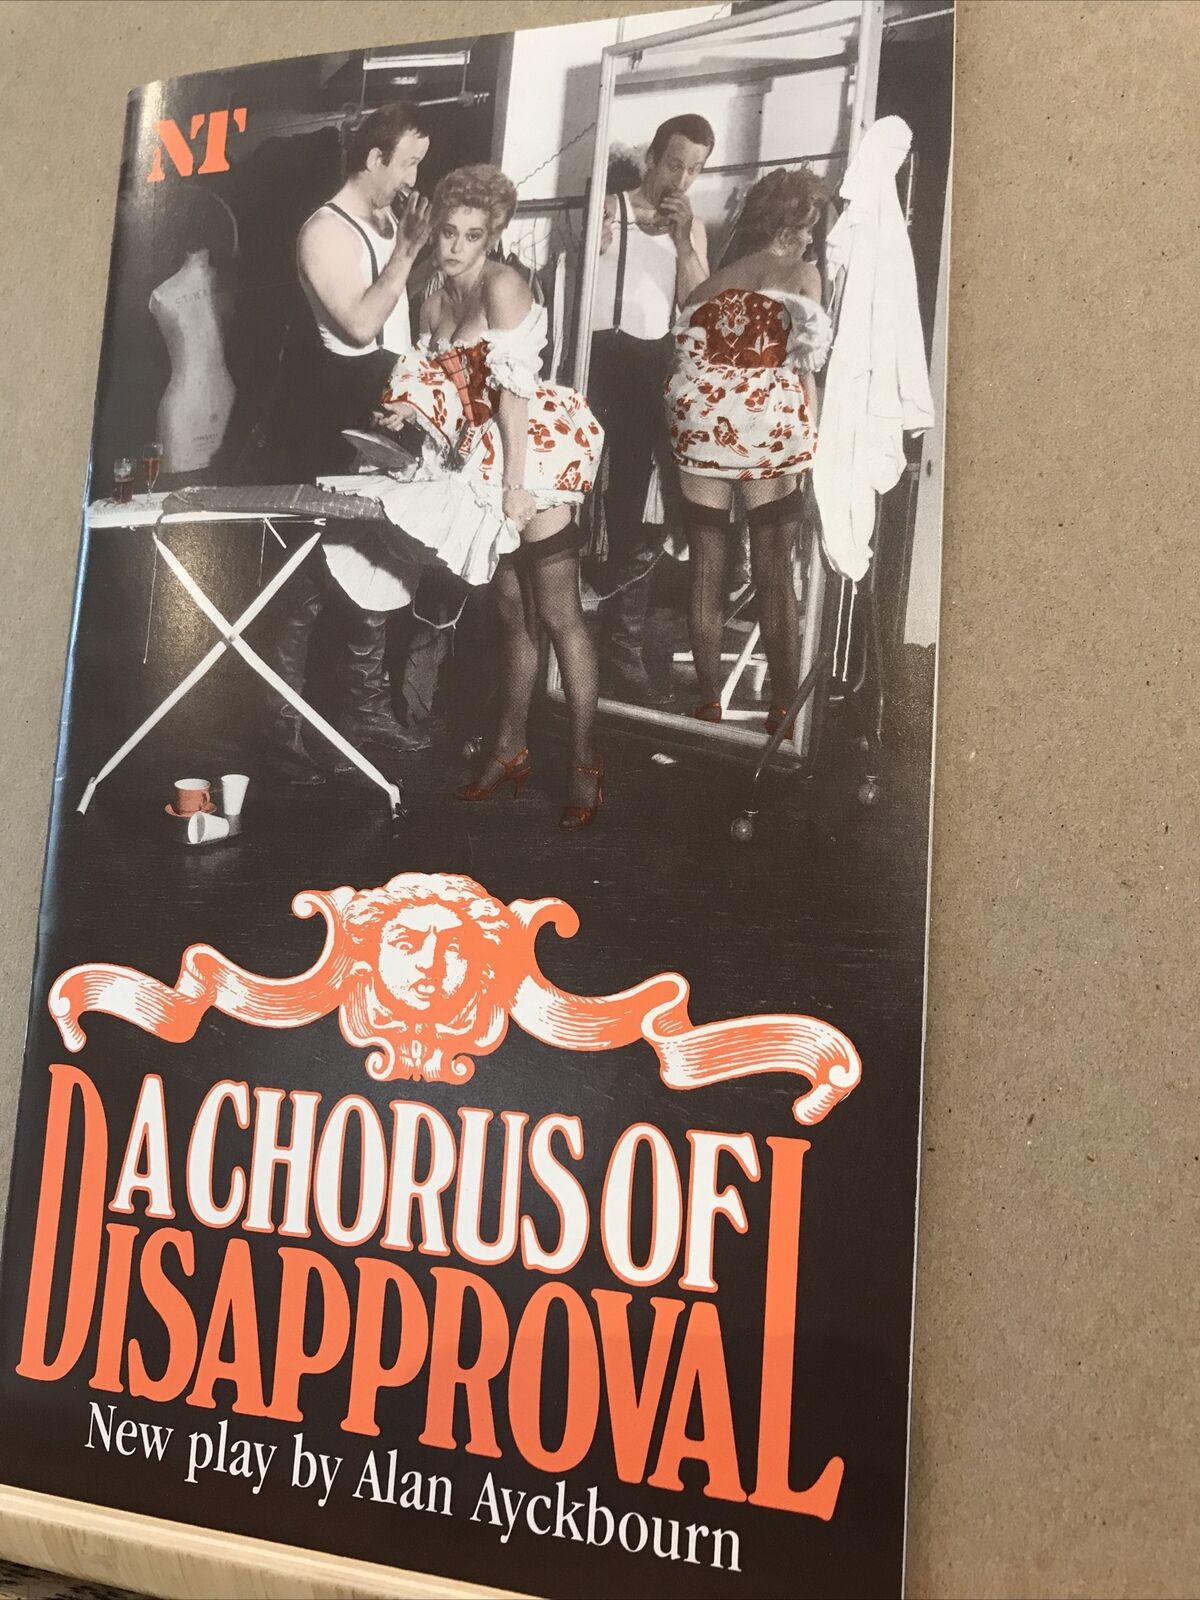 A CHORUS OF DISAPPROVAL starring Imelda New arrival Wholesale Staunton 198 at National